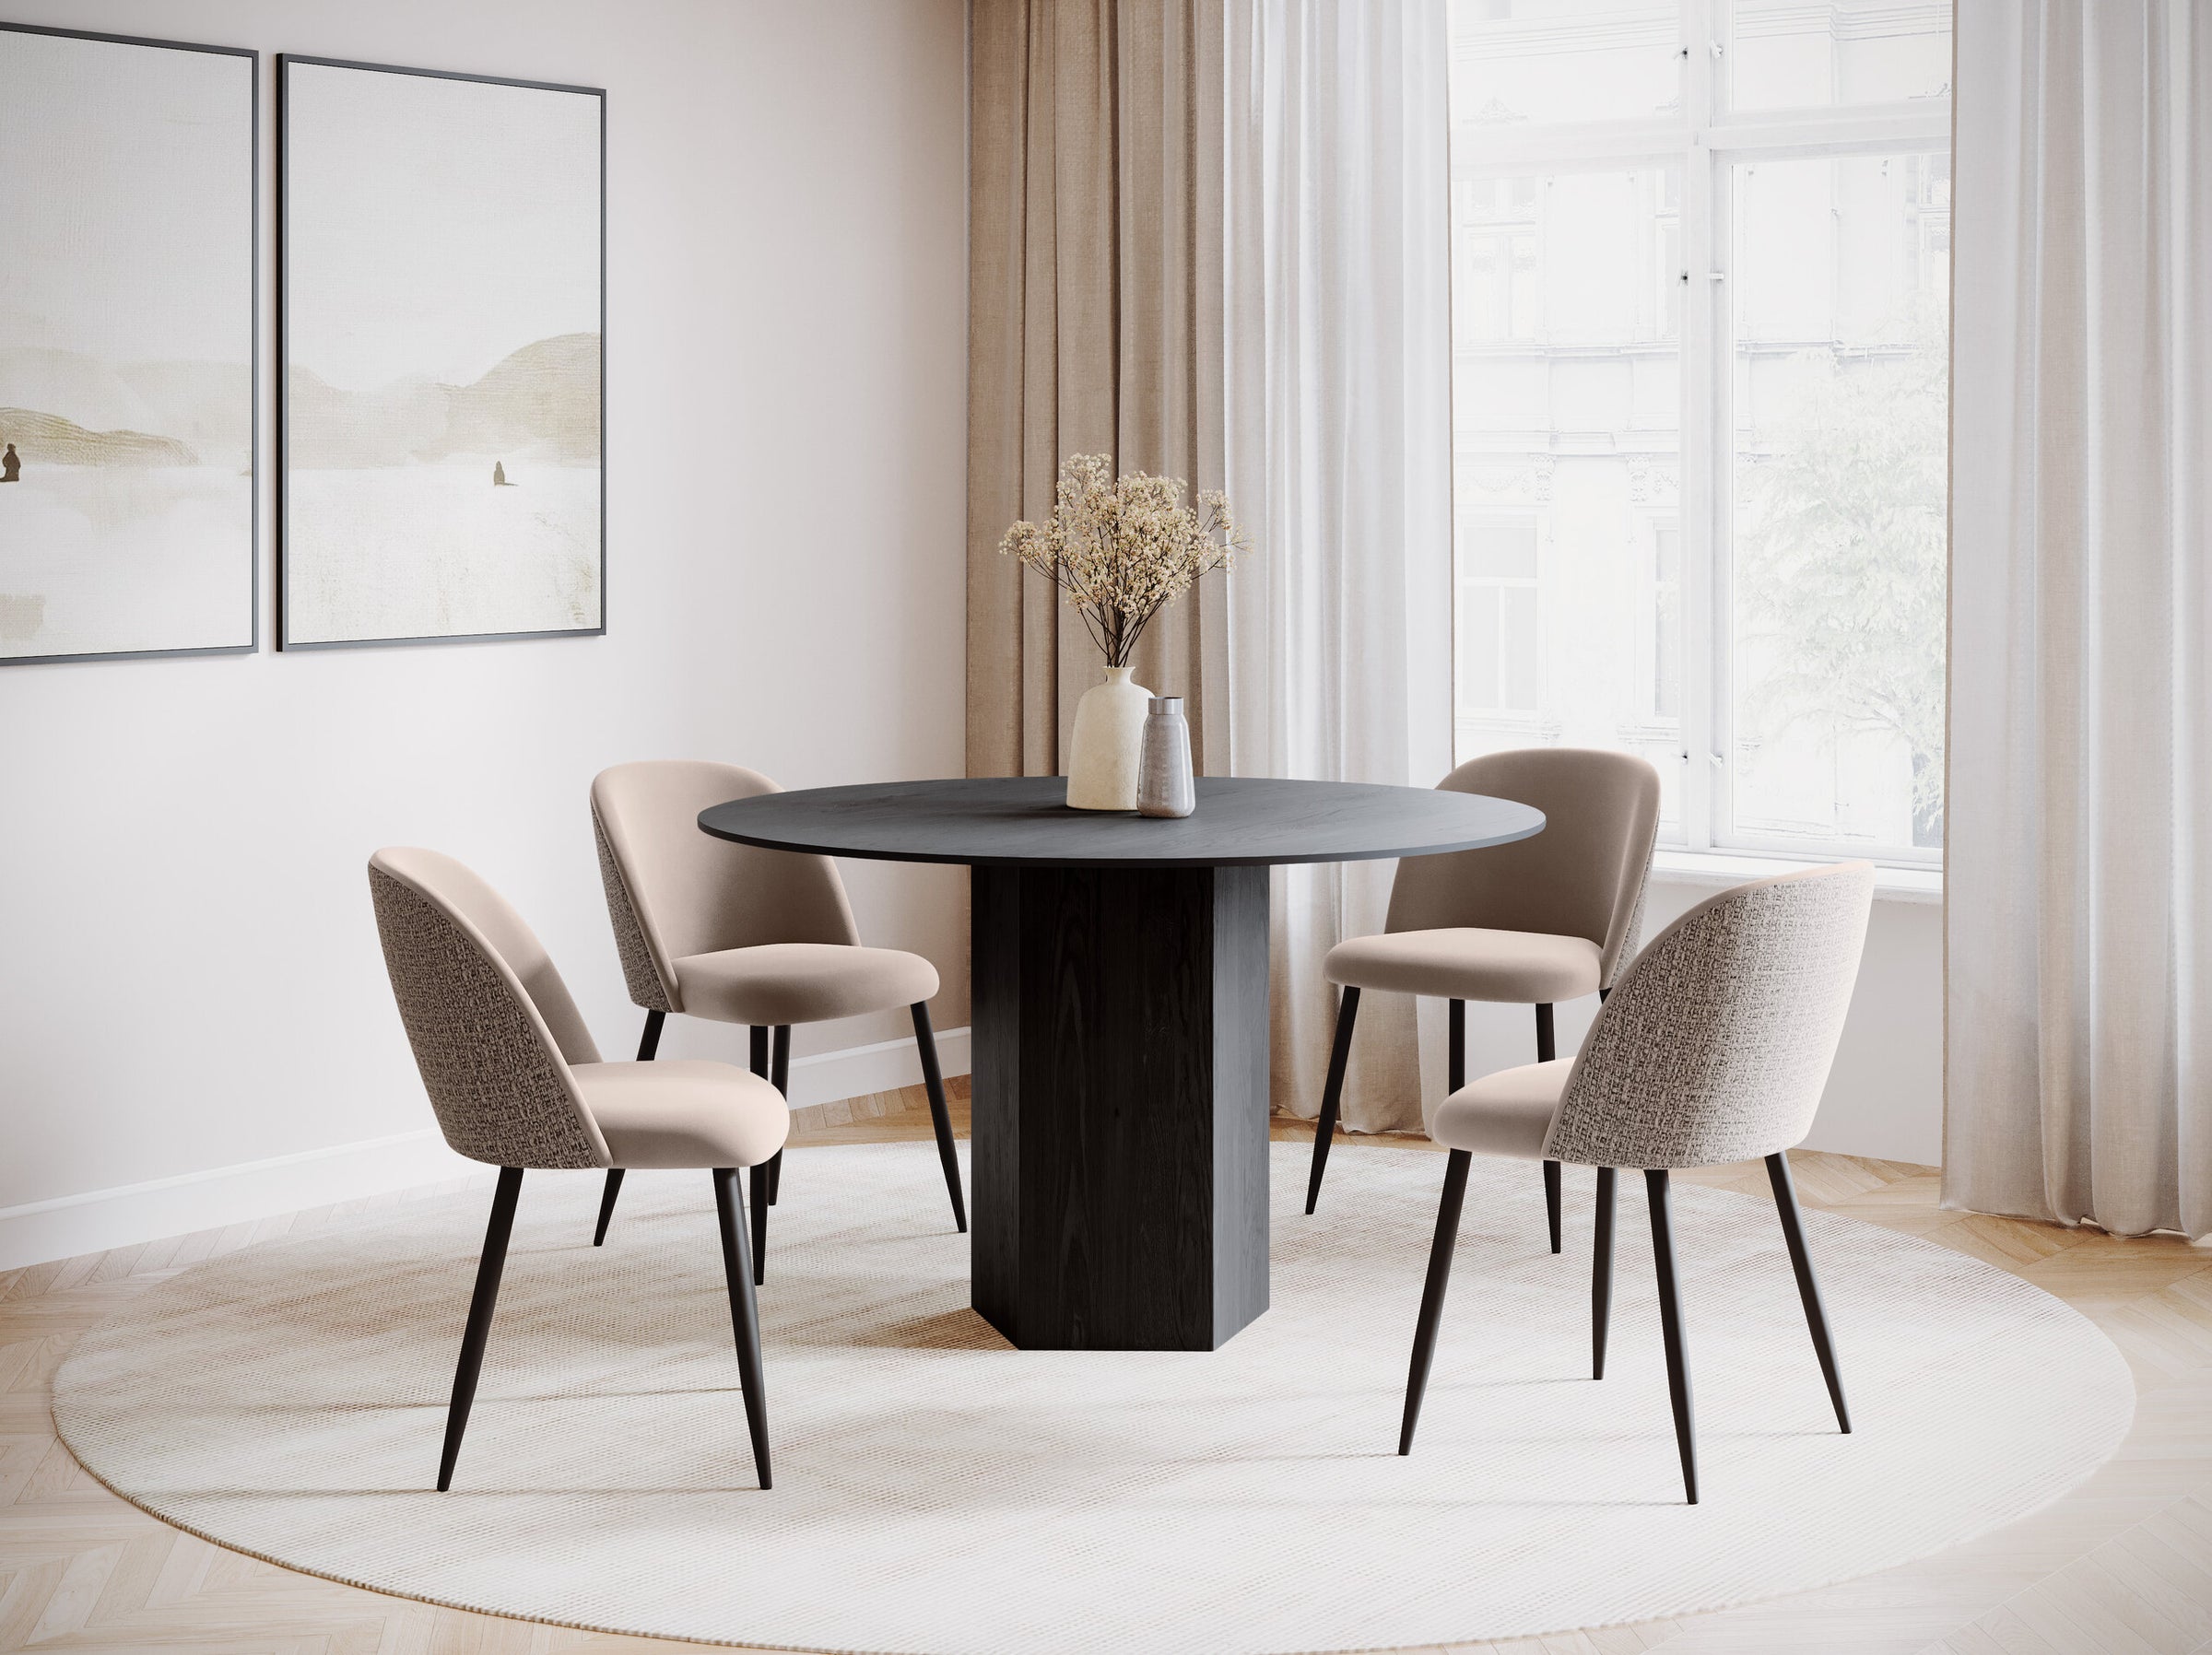 Rayan tables & chairs velvet beige